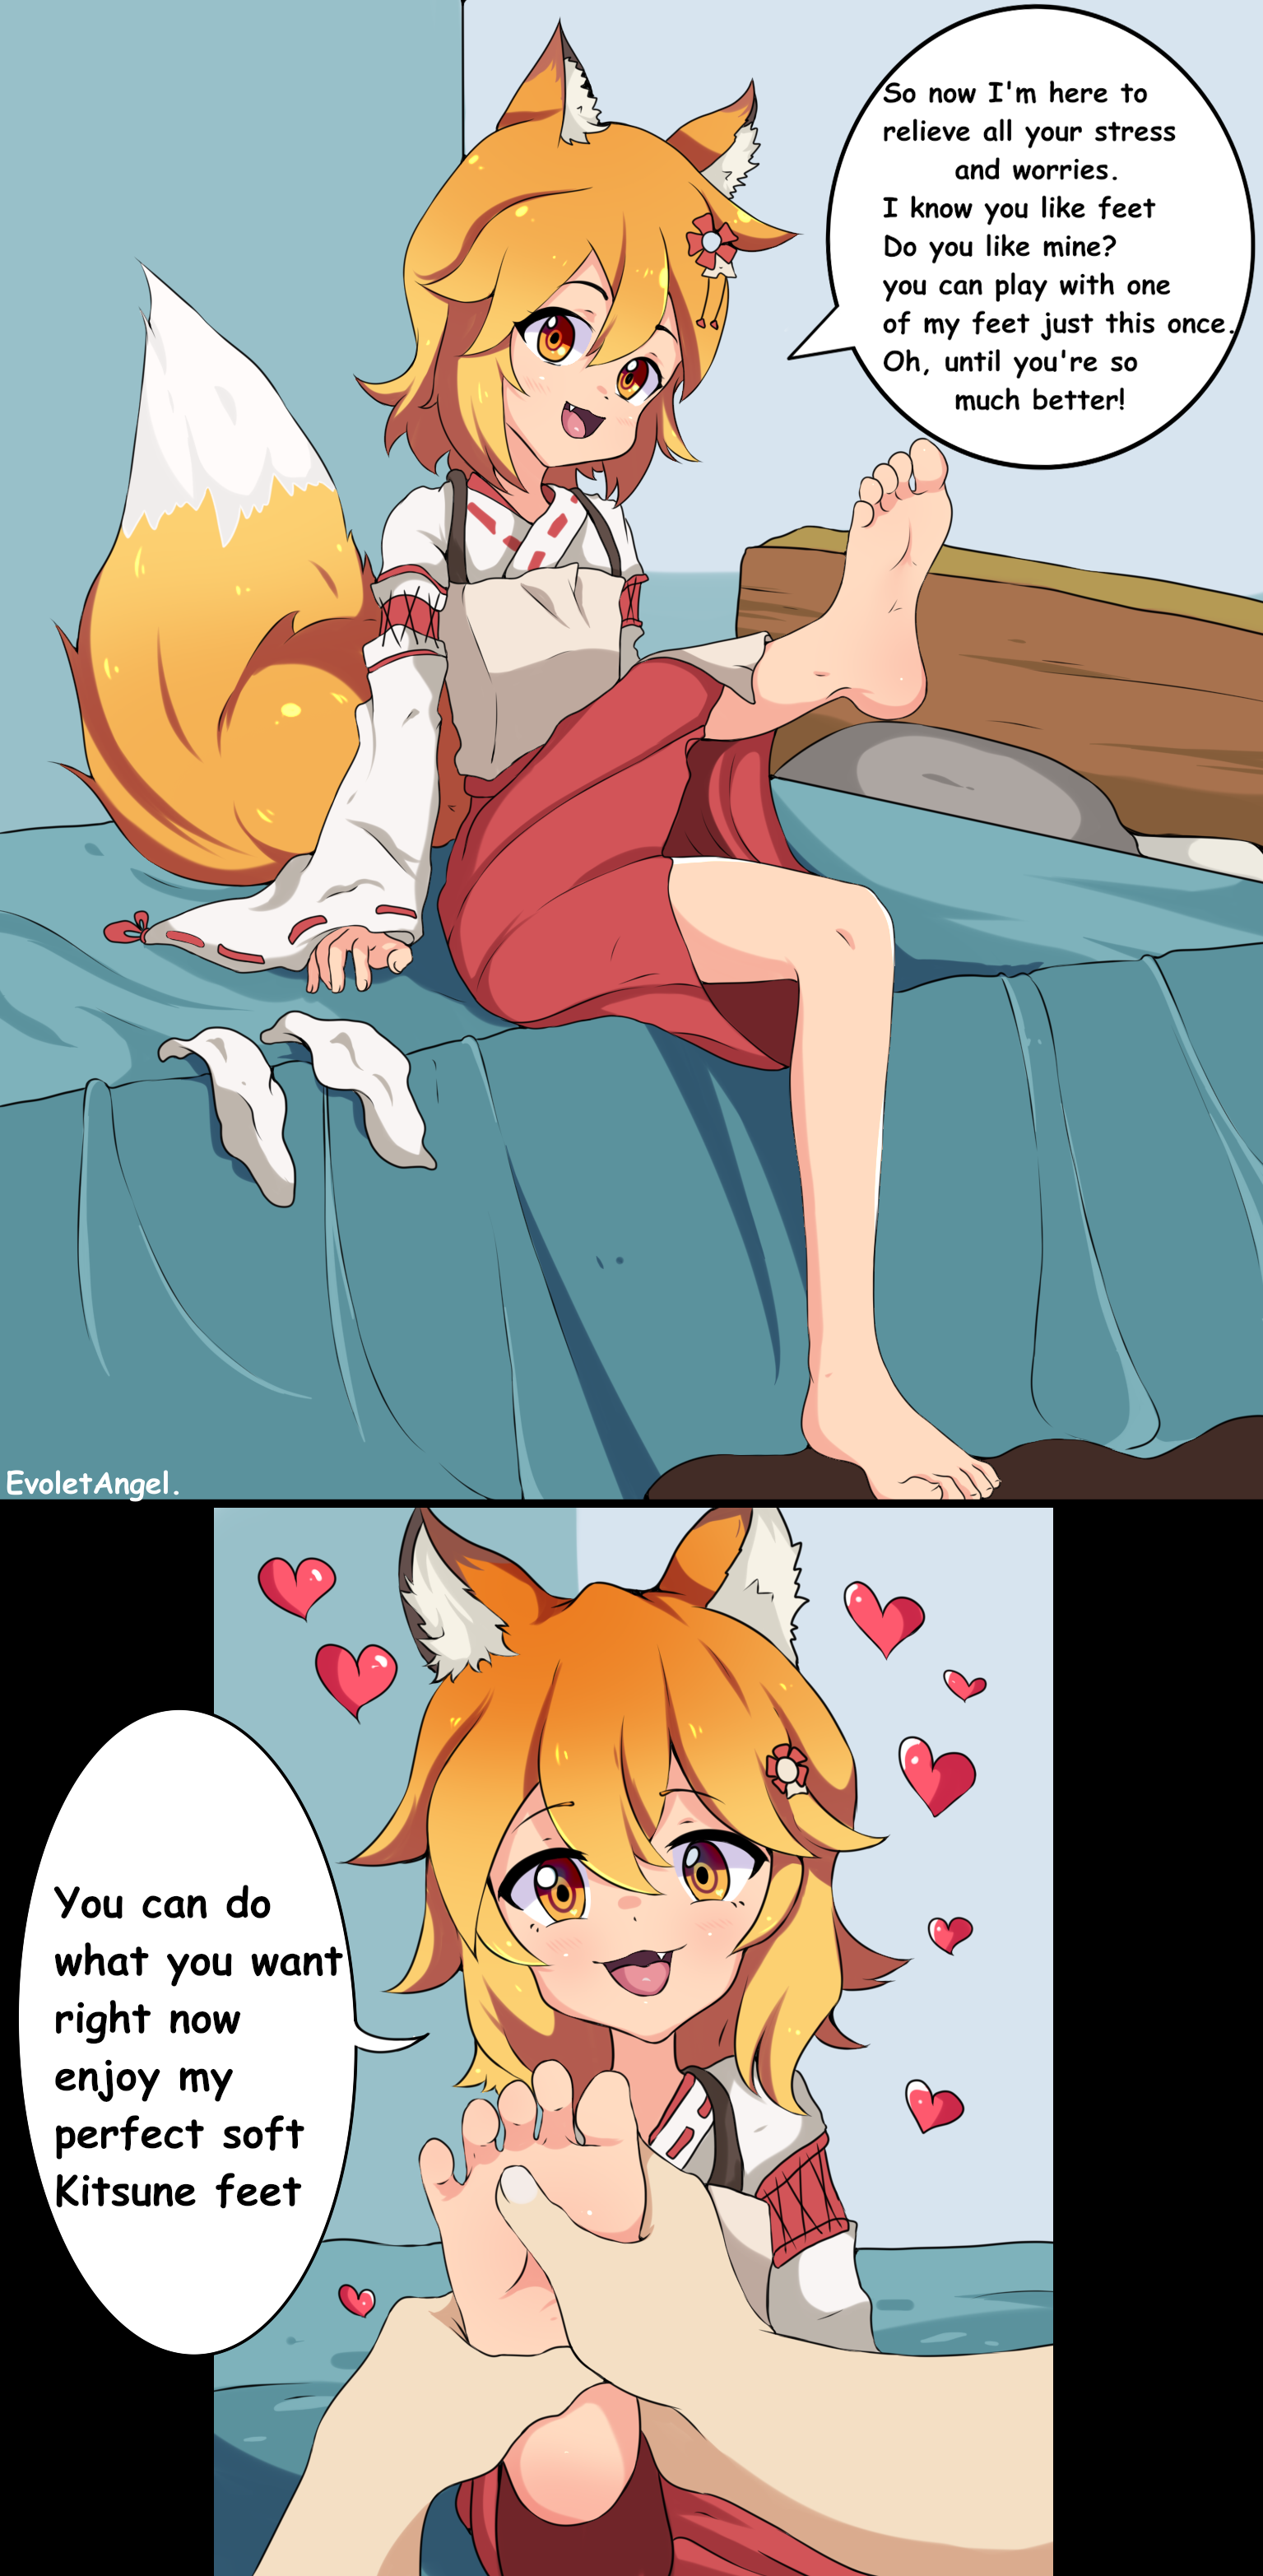 A day with a Kitsune.